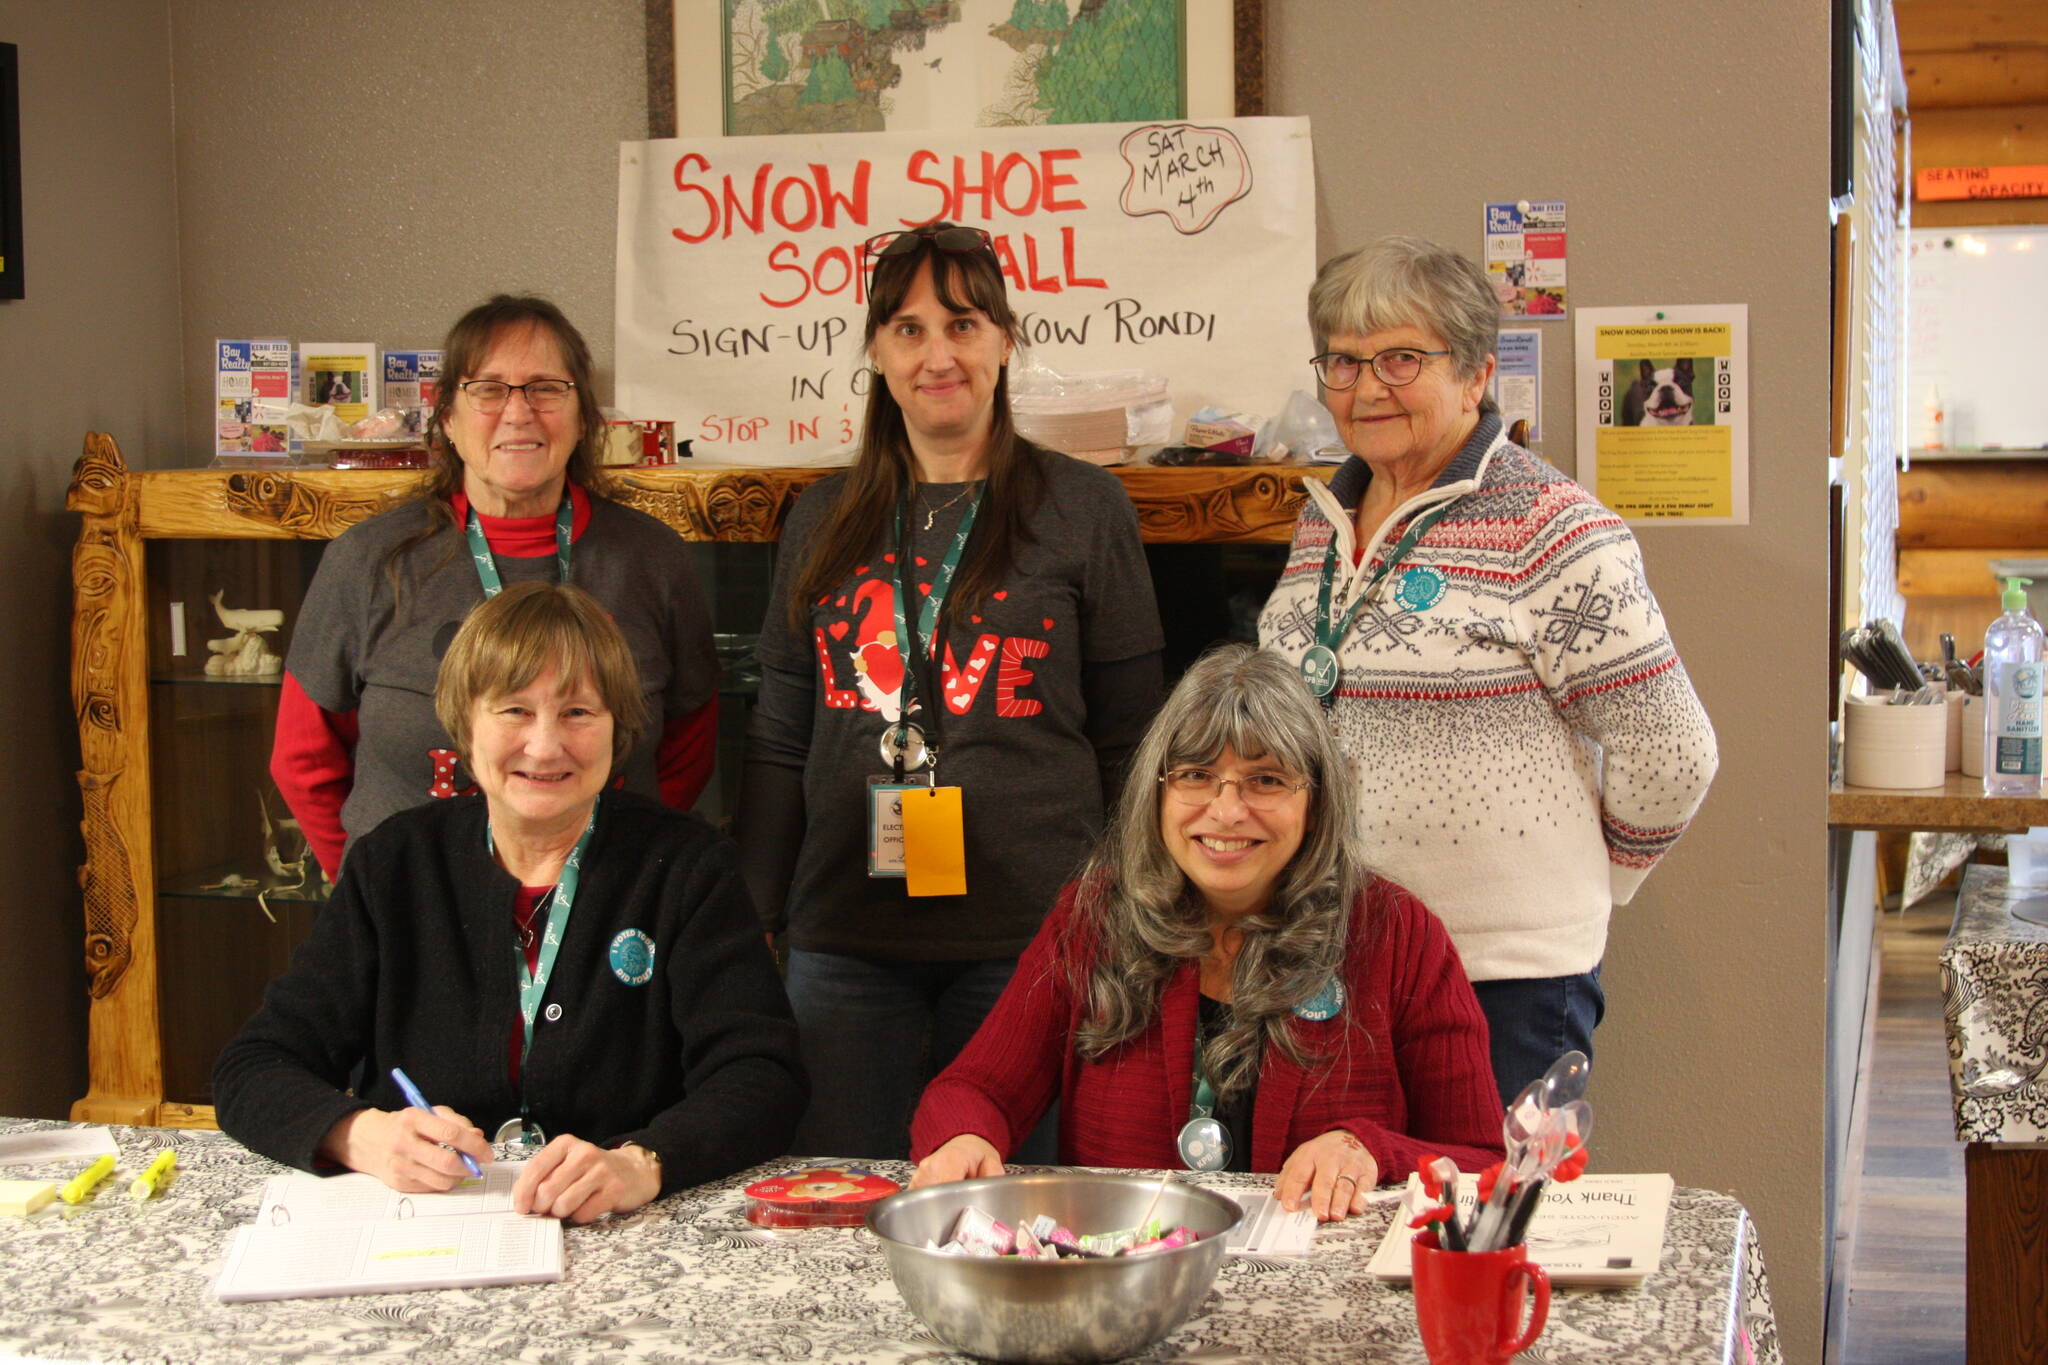 Back to front, from left to right: Poll workers Bobby Ness, Jennifer Dress, Carol Slavik, Mary Perry, and Loretta Stapel pose by the check-in table at the Anchor Point Senior Center during the special borough mayoral election on Tuesday, Feb. 14, 2023 in Anchor Point, Alaska. (Photo by Delcenia Cosman/Homer News)